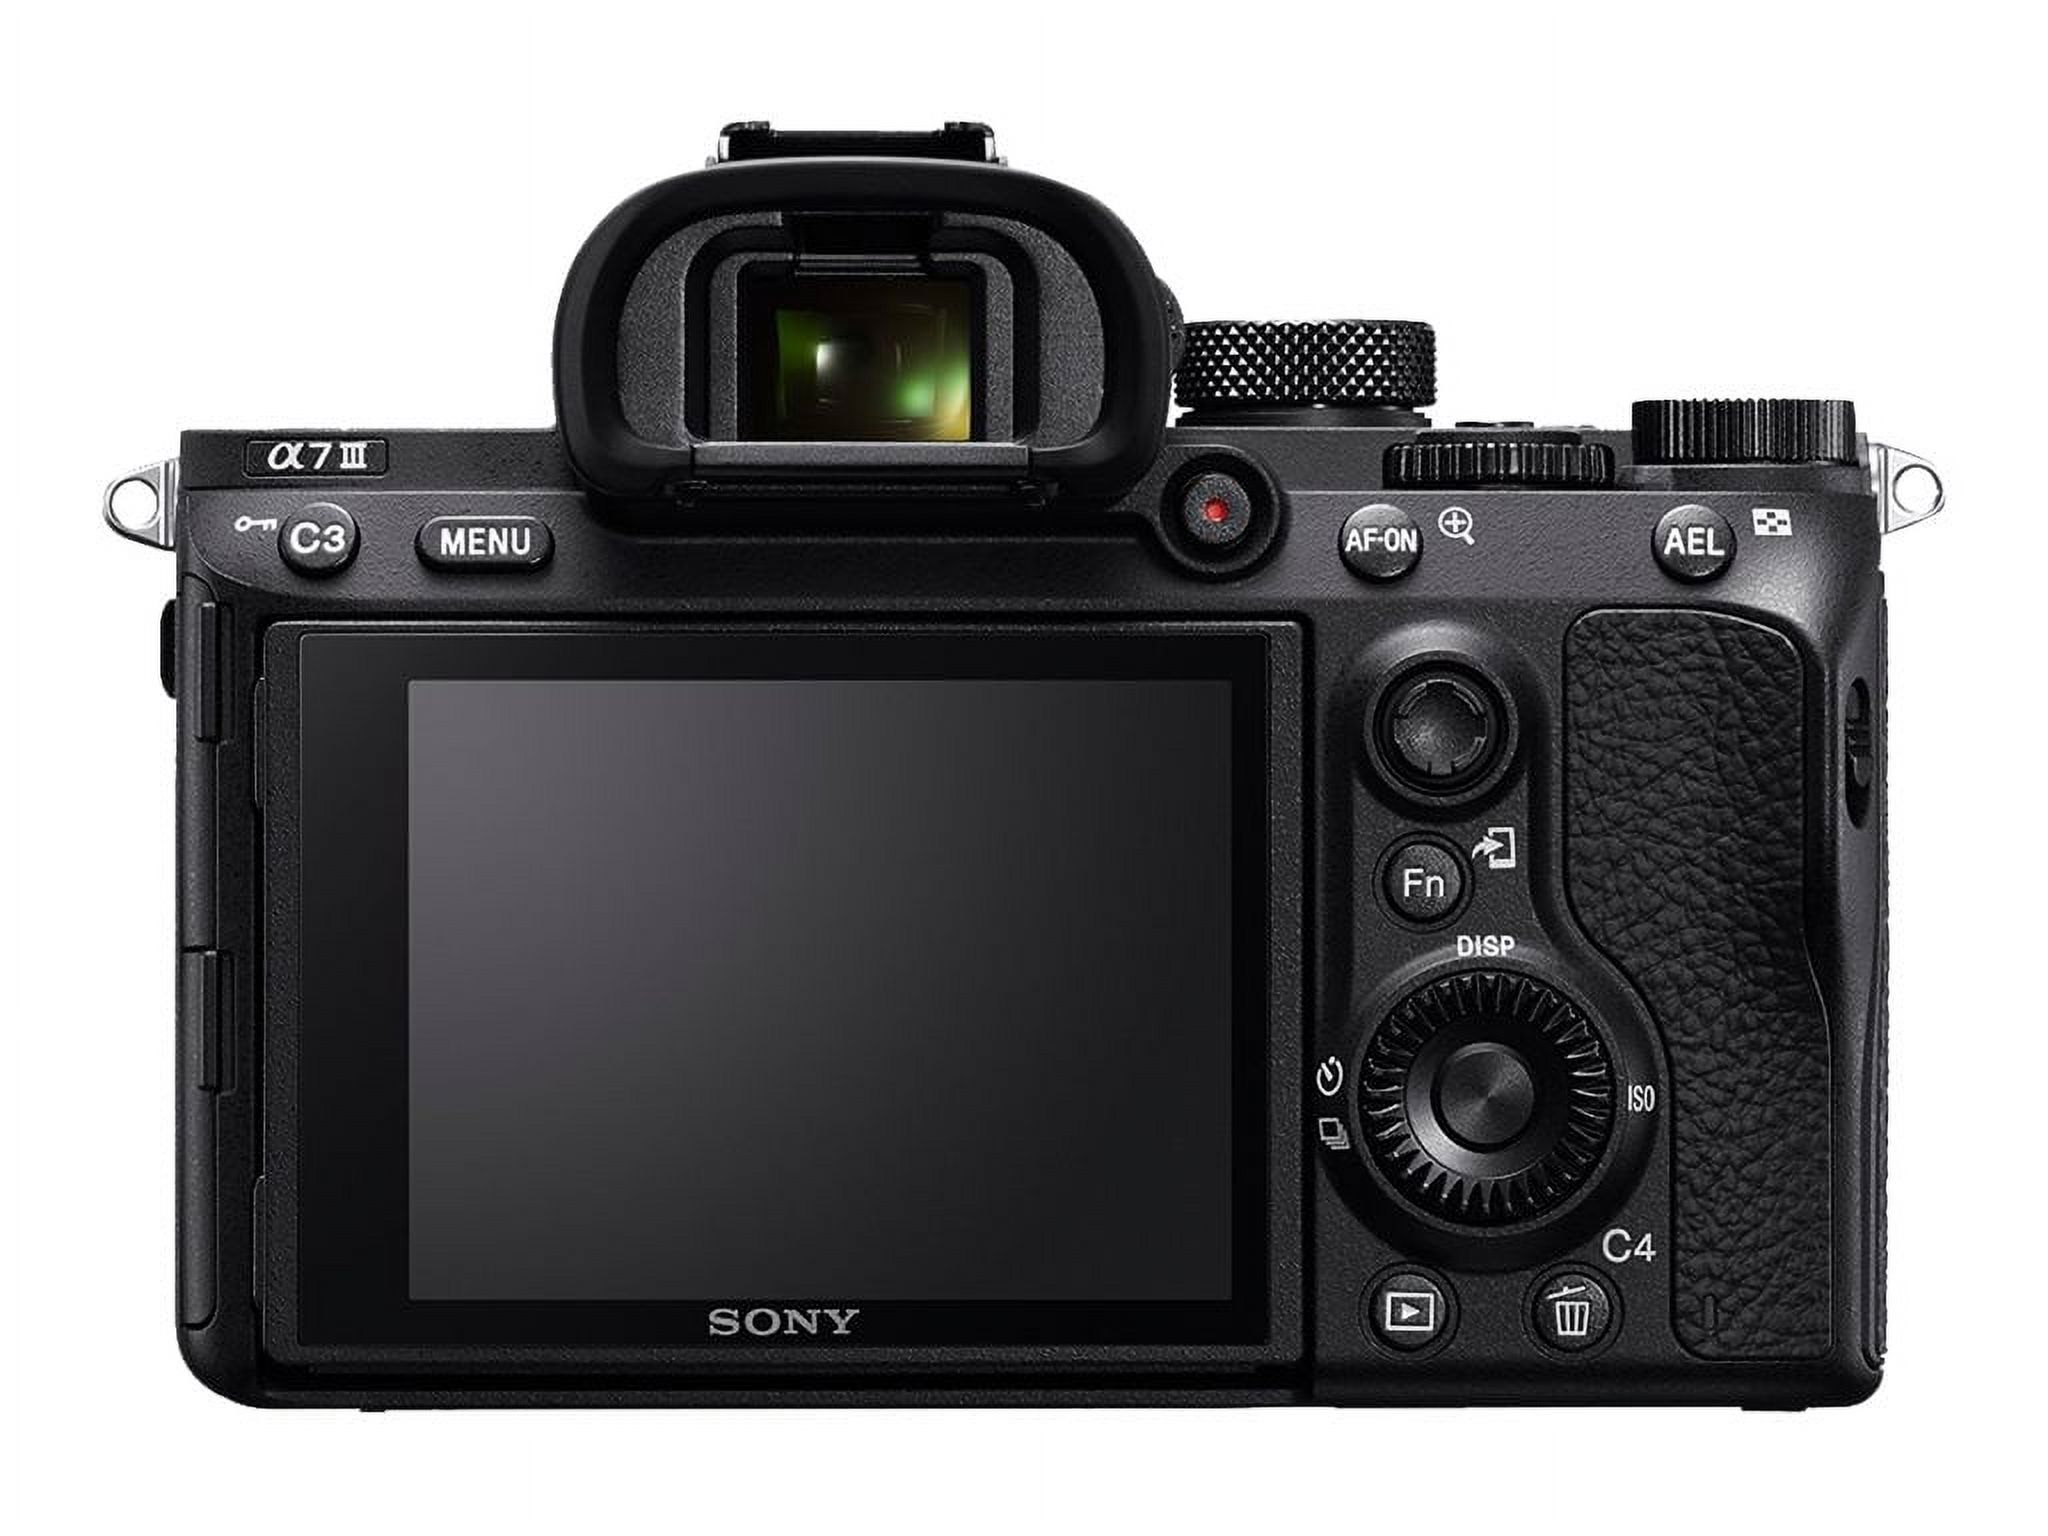 Sony a7 III ILCE-7M3 - Digital camera - mirrorless - 24.2 MP - Full Frame - 4K / 30 fps - body only - Wi-Fi, NFC, Bluetooth - image 3 of 6